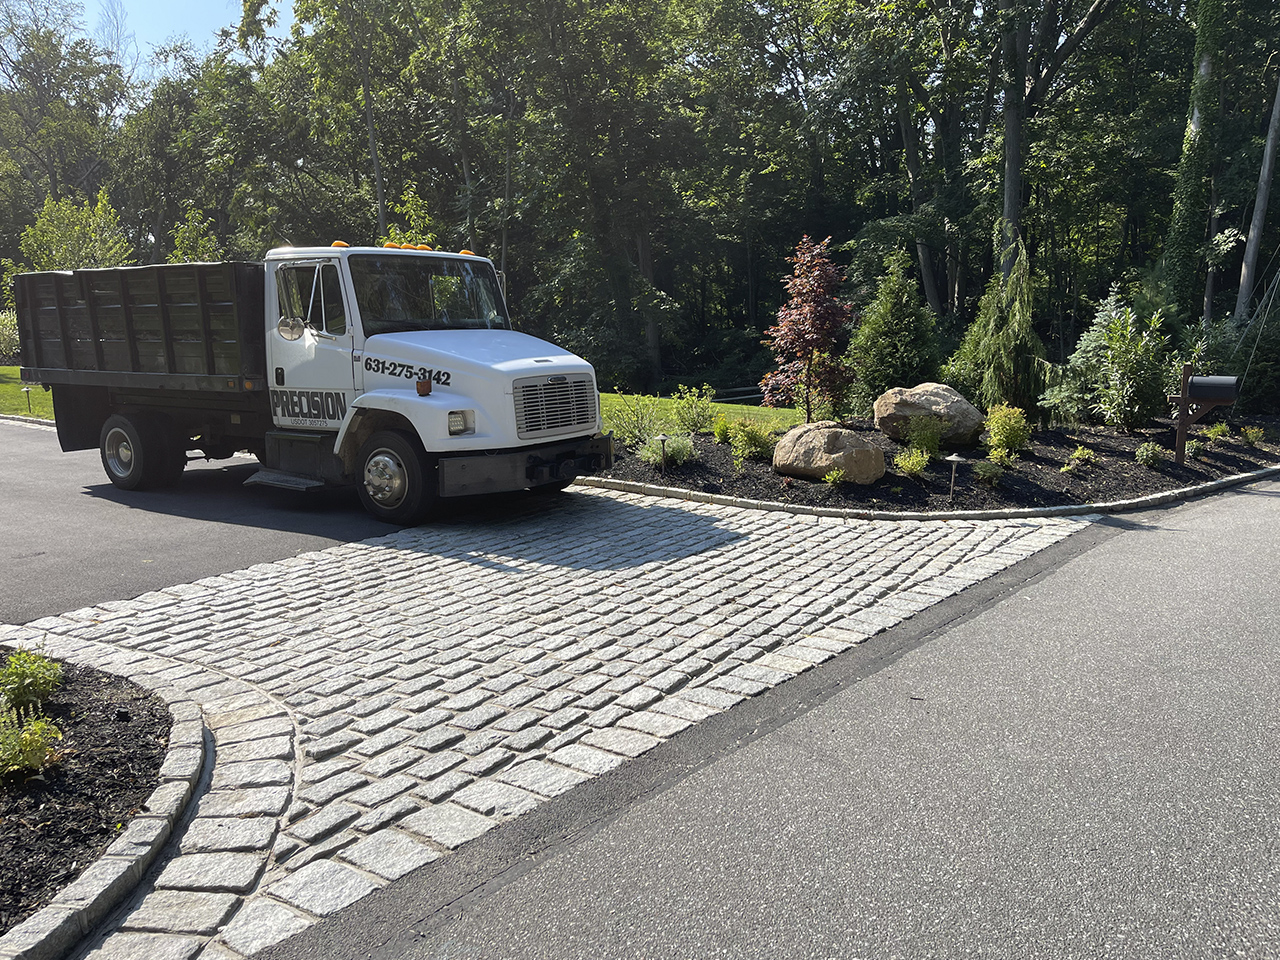 A skillfully paved driveway by Affordable Patio, ensuring long-lasting durability and strength